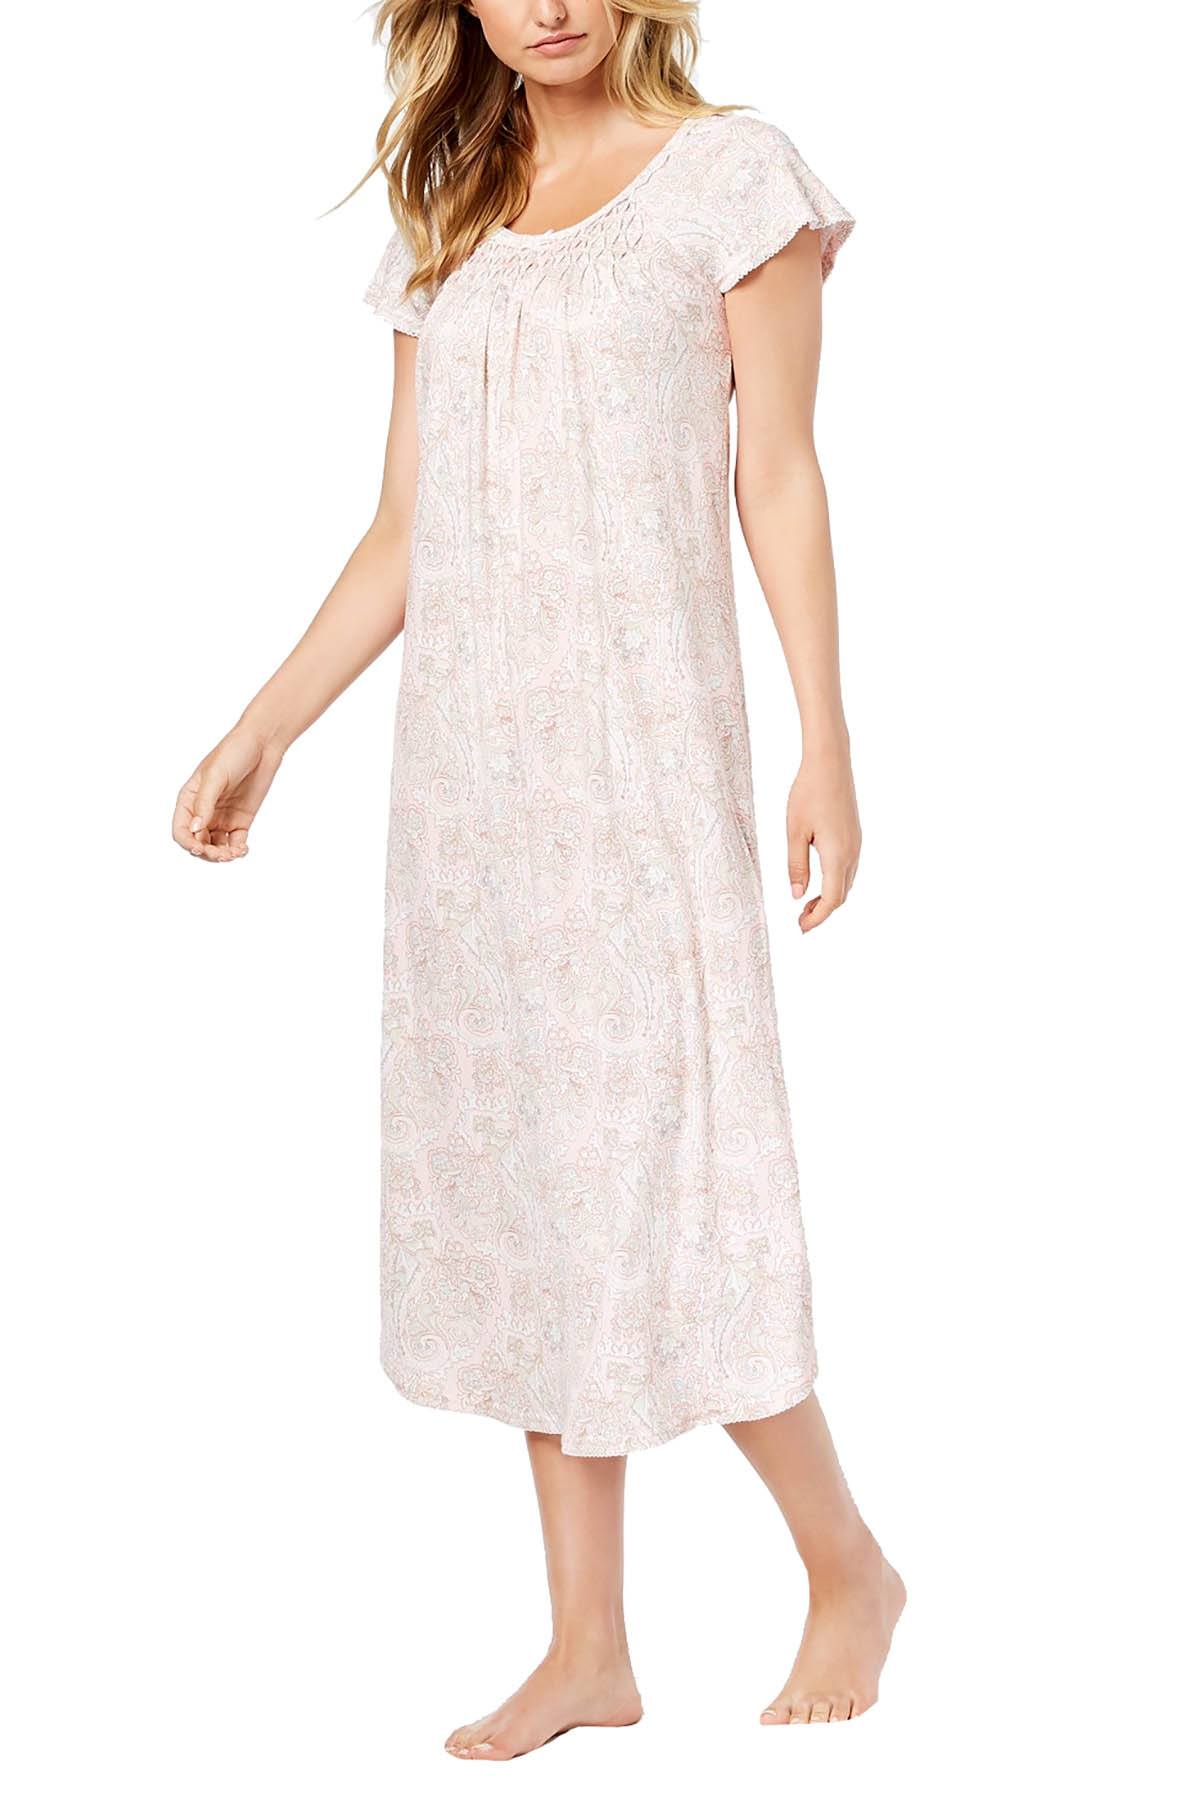 Miss Elaine Neutral Paisley Smocked Printed Knit Nightgown